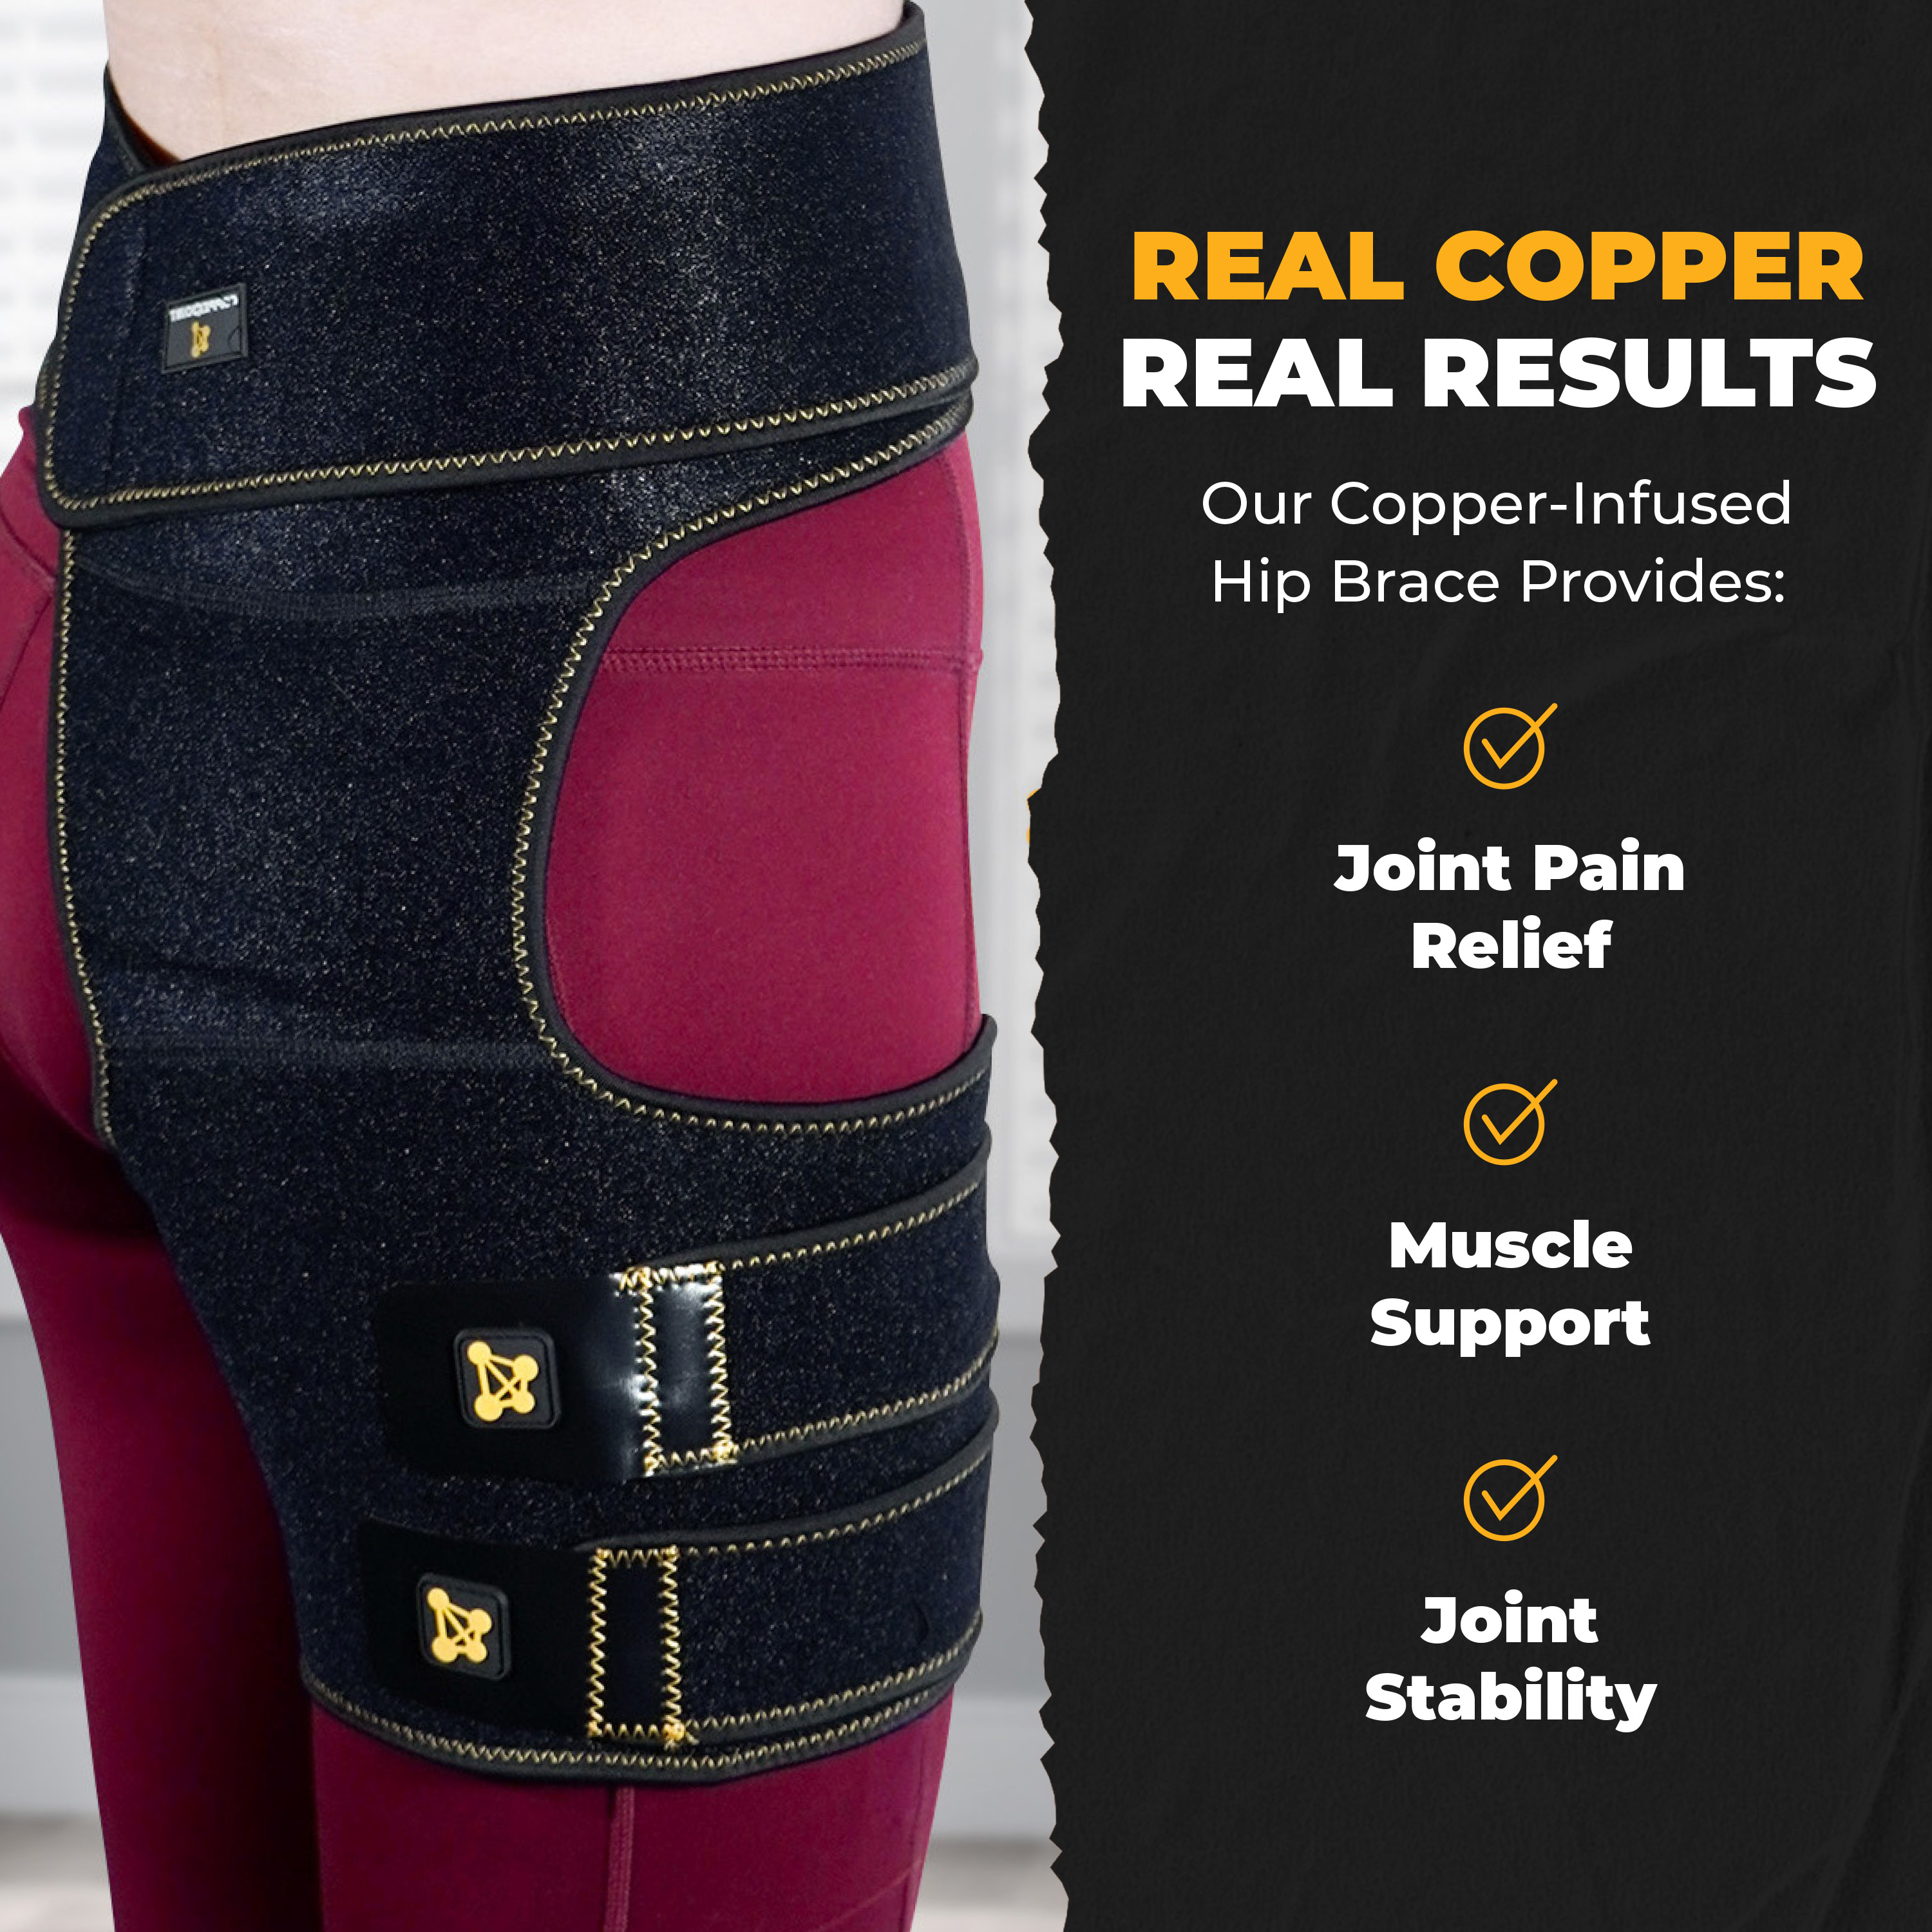 CopperJoint Launches New Sciatica Pain Relief Devices On Amazon